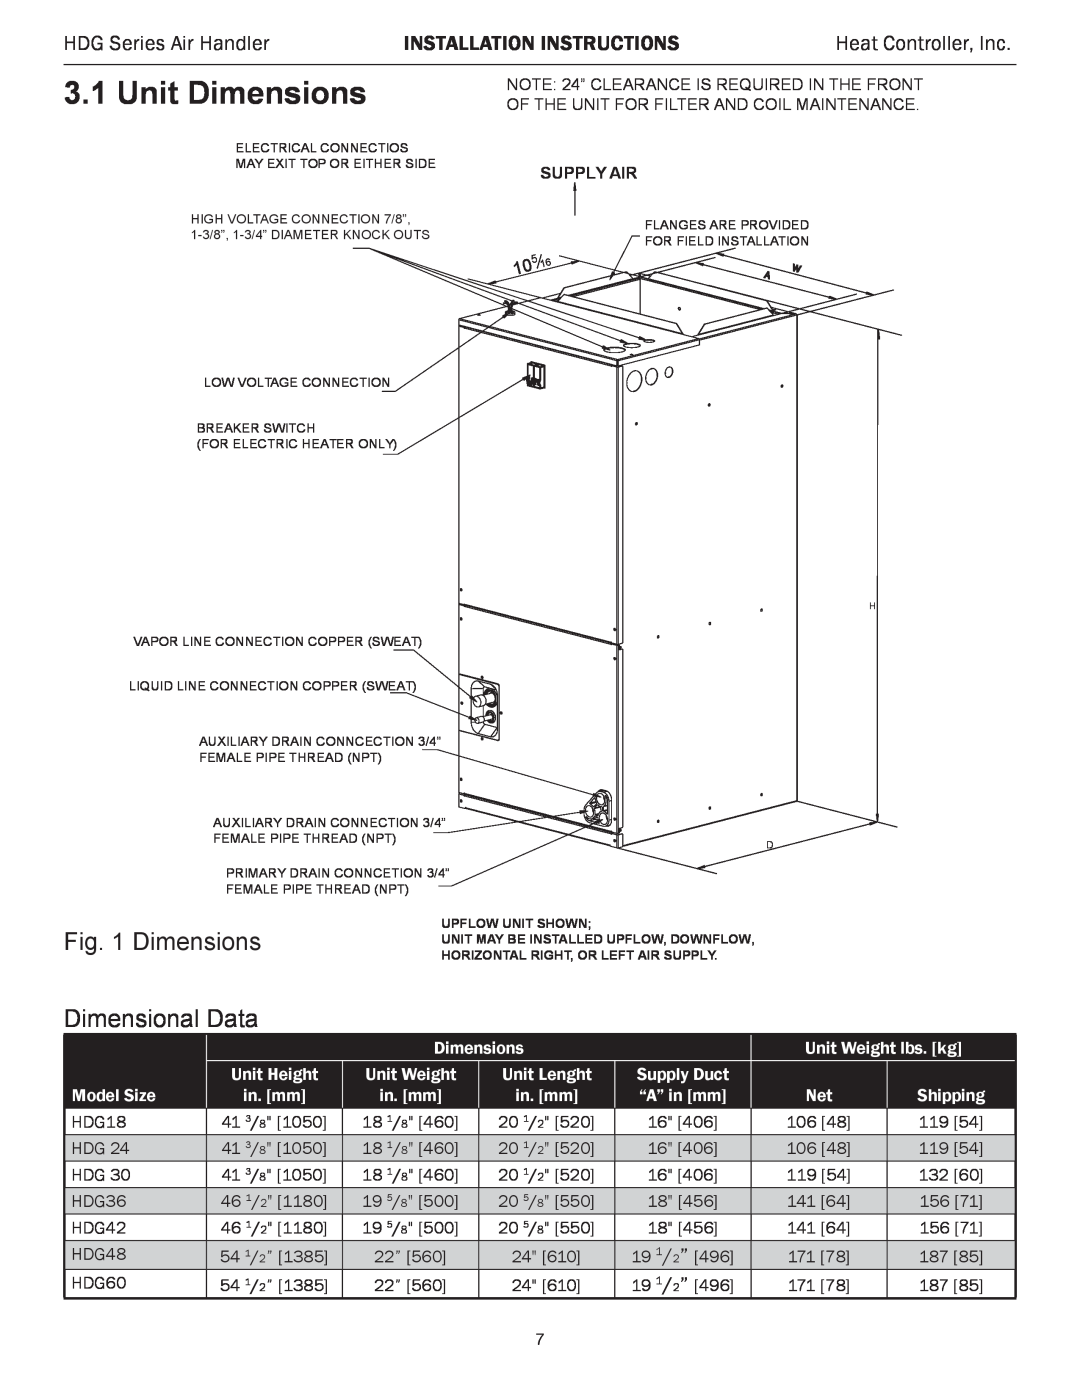 Heat Controller HDG60 Unit Dimensions, Dimensions Dimensional Data, HDG Series Air Handler, Installation Instructions 